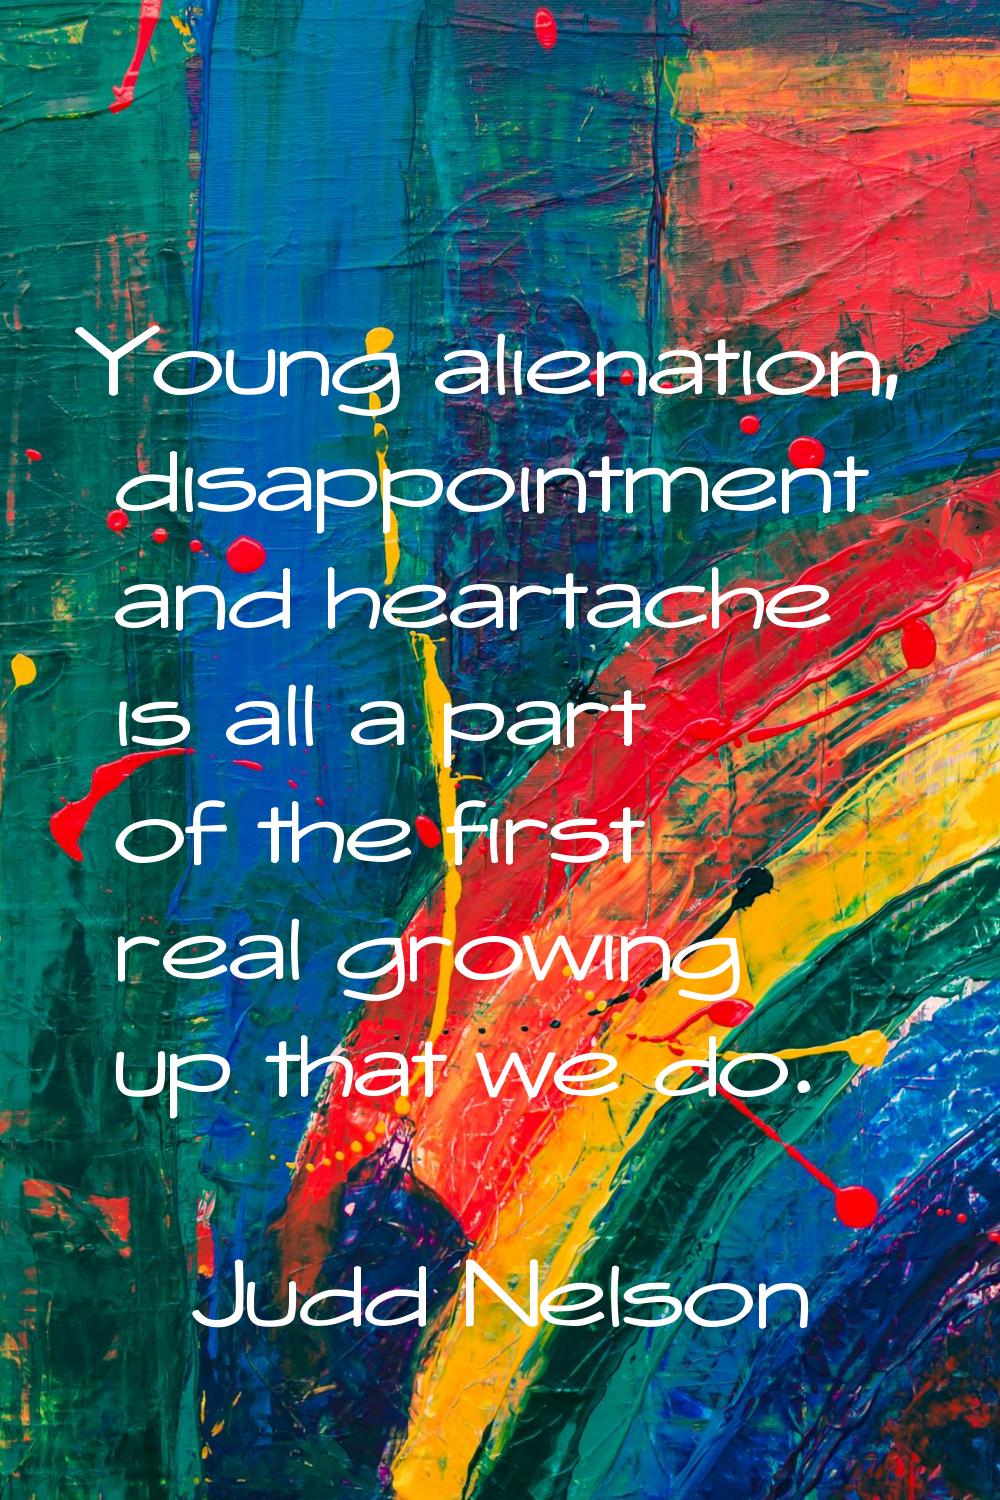 Young alienation, disappointment and heartache is all a part of the first real growing up that we d